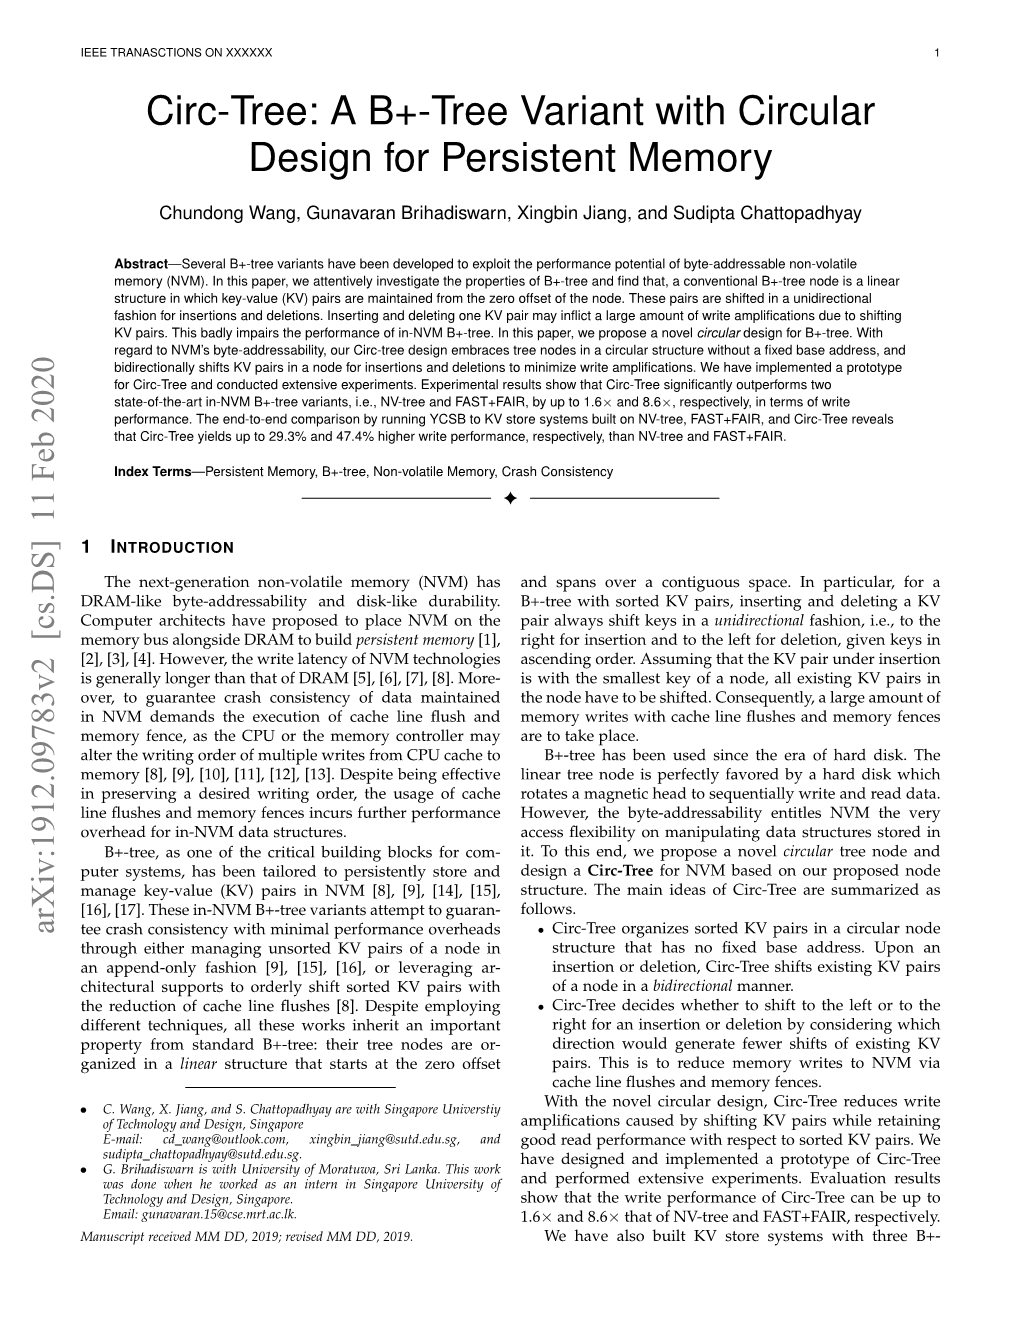 Circ-Tree: a B+-Tree Variant with Circular Design for Persistent Memory